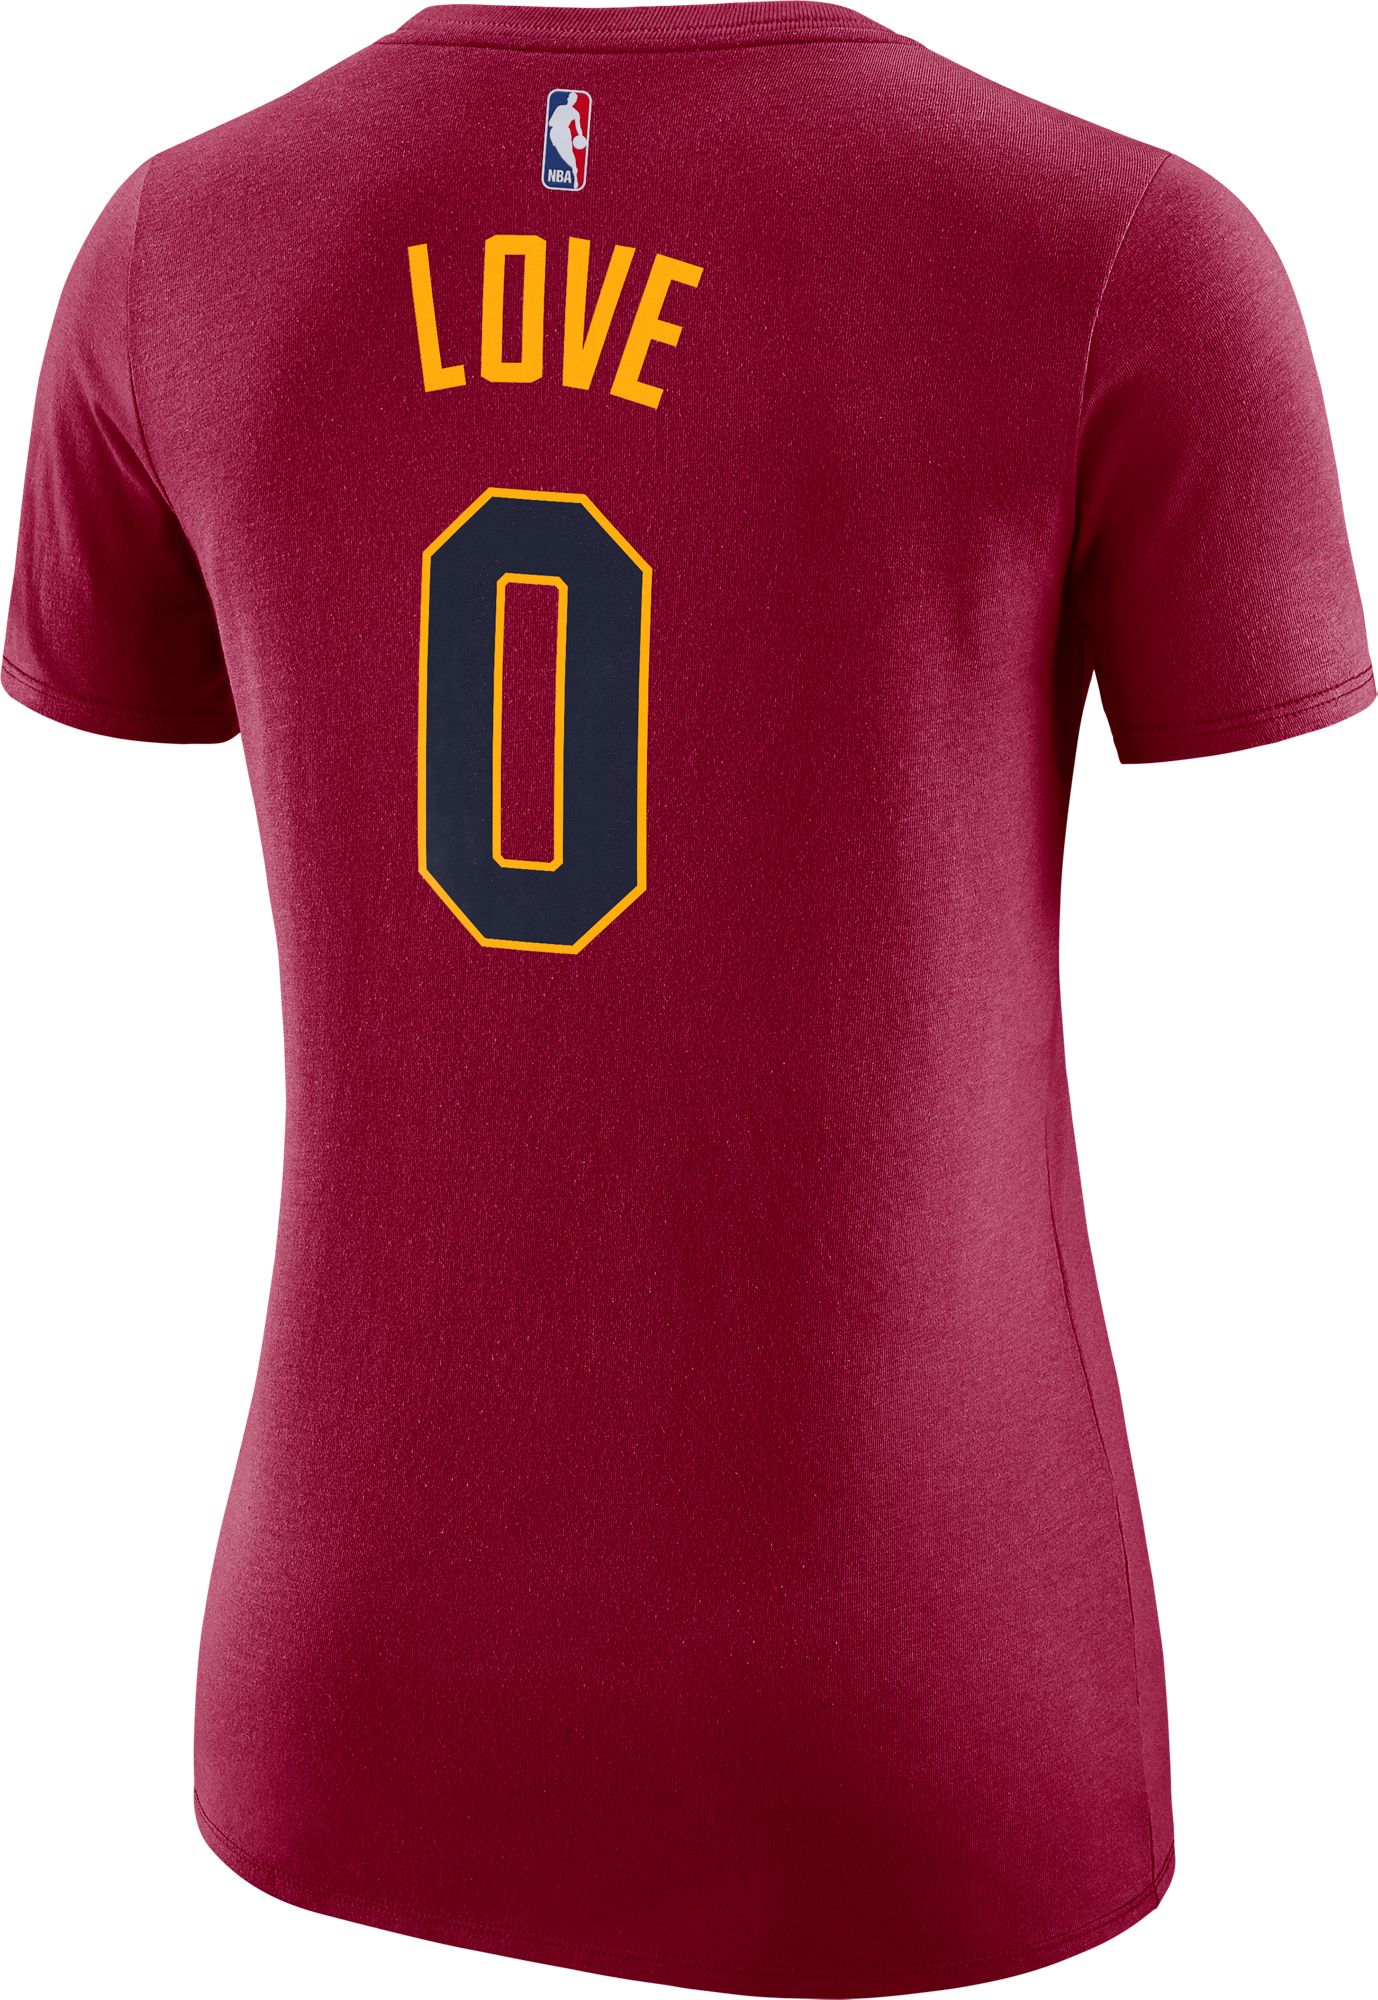 cleveland cavaliers christmas jersey